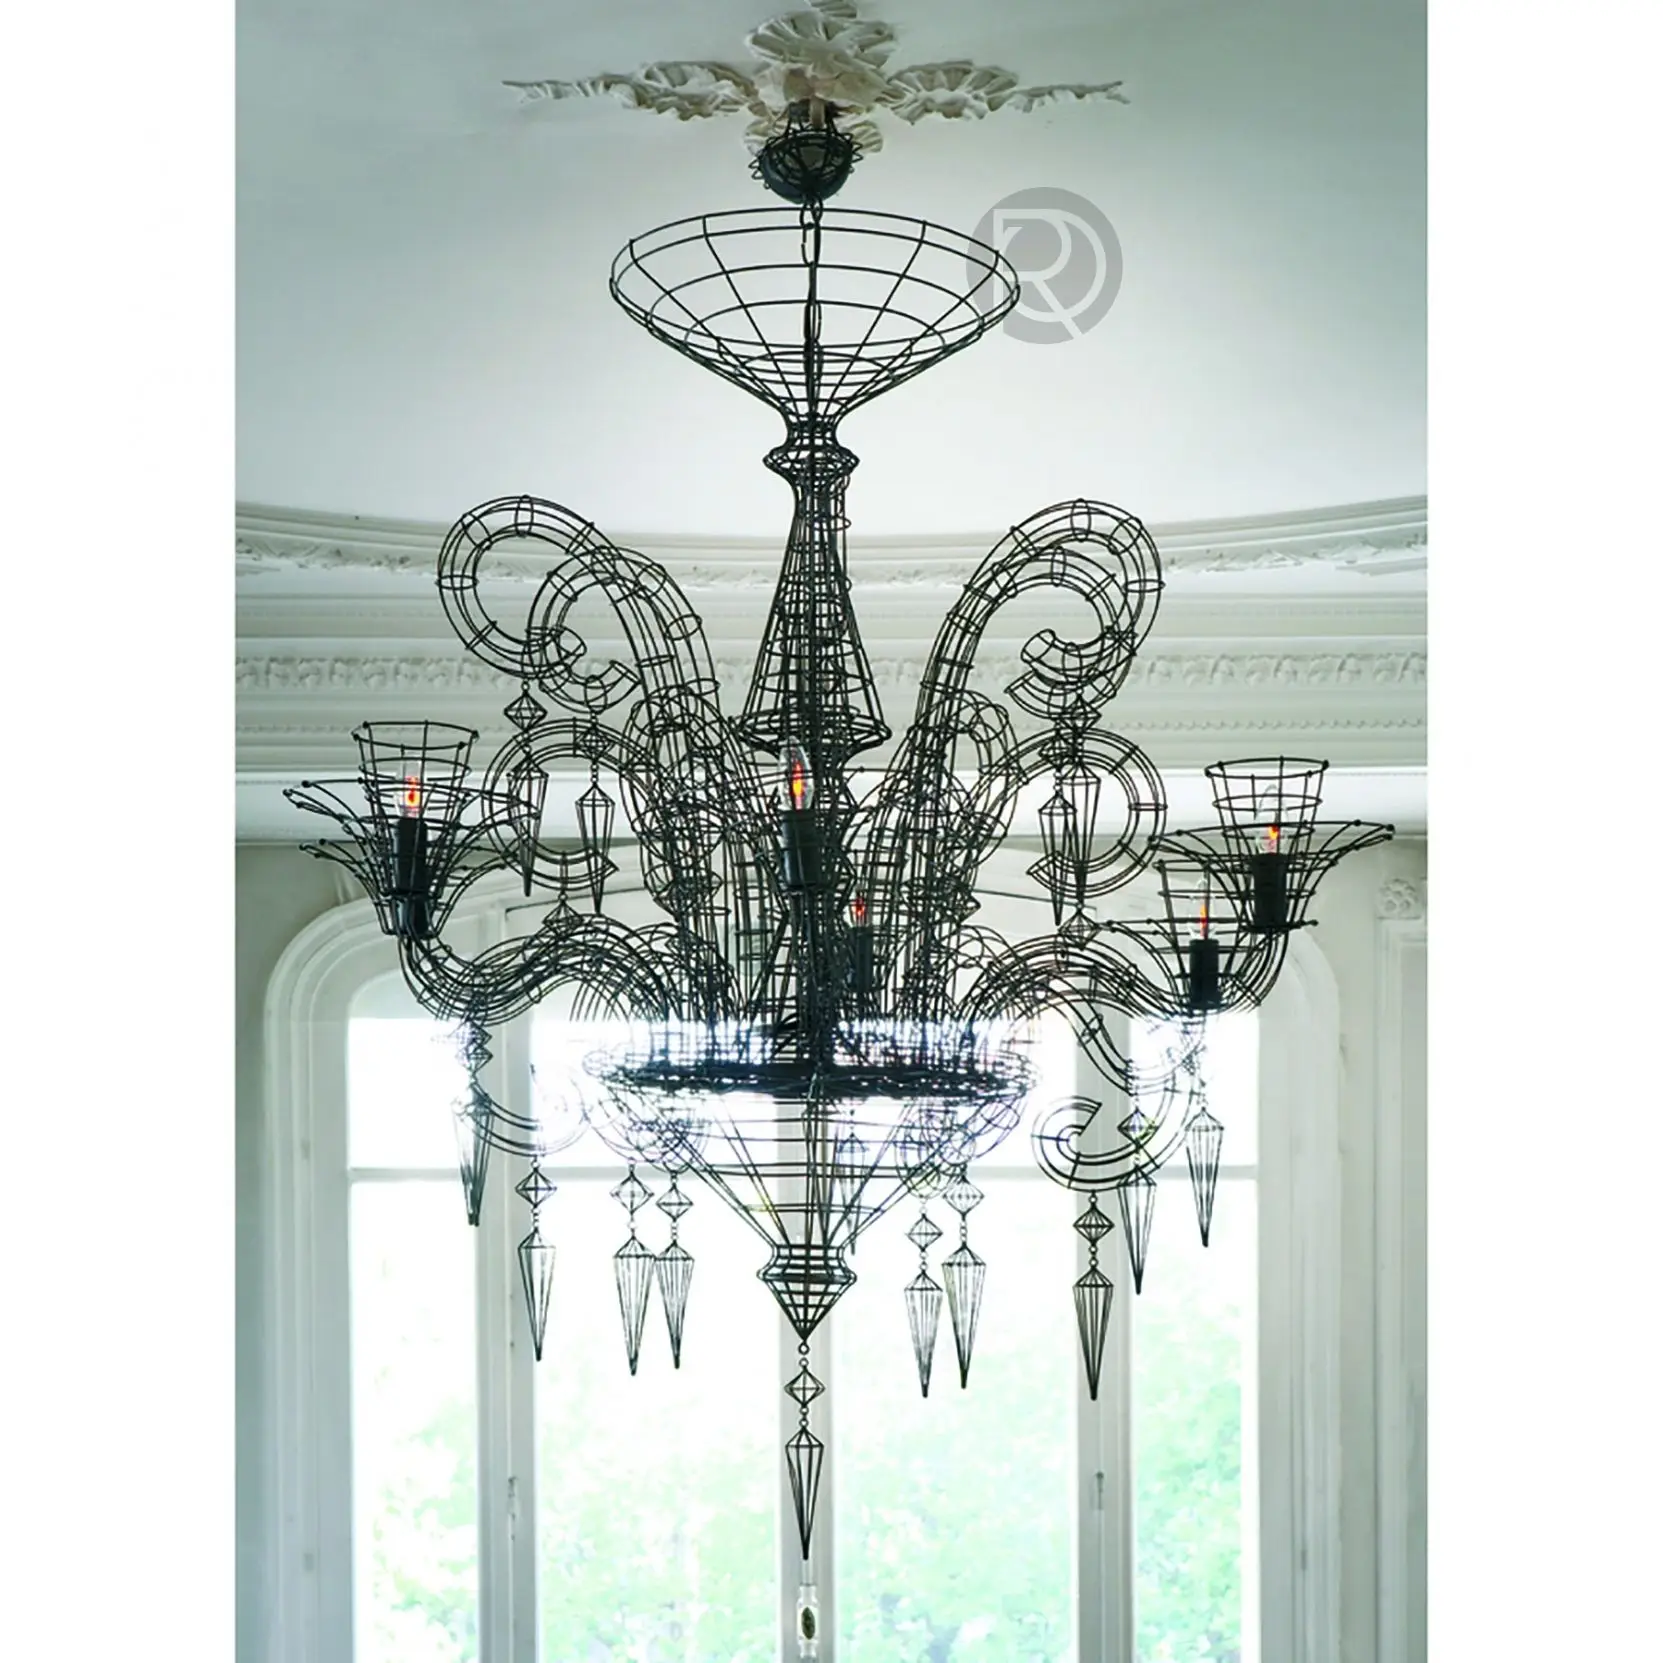 Люстра ANGELUS L CHANDELIER by Forestier